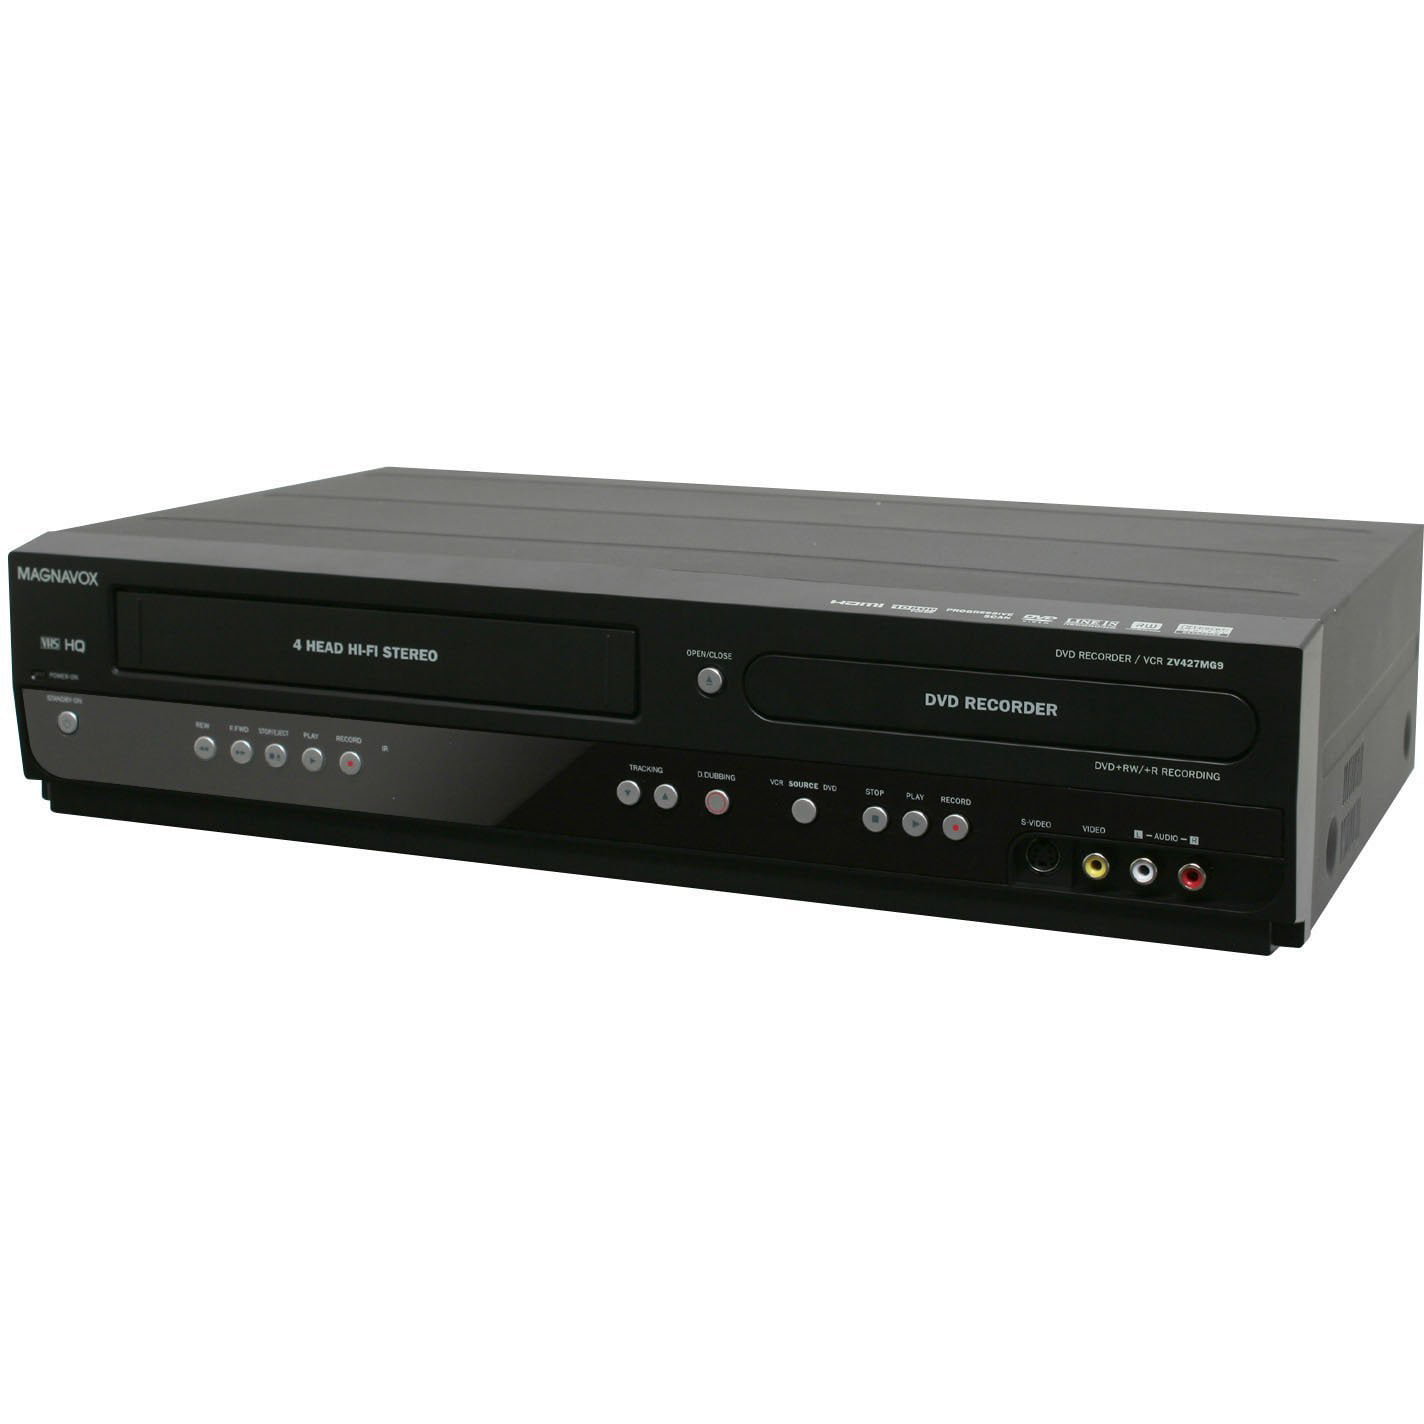 Magnavox ZV427MG9 DVD Recorder/VCR Combo (USED). Comes with Original  Remote, Manual, HDMI and AV Cables.